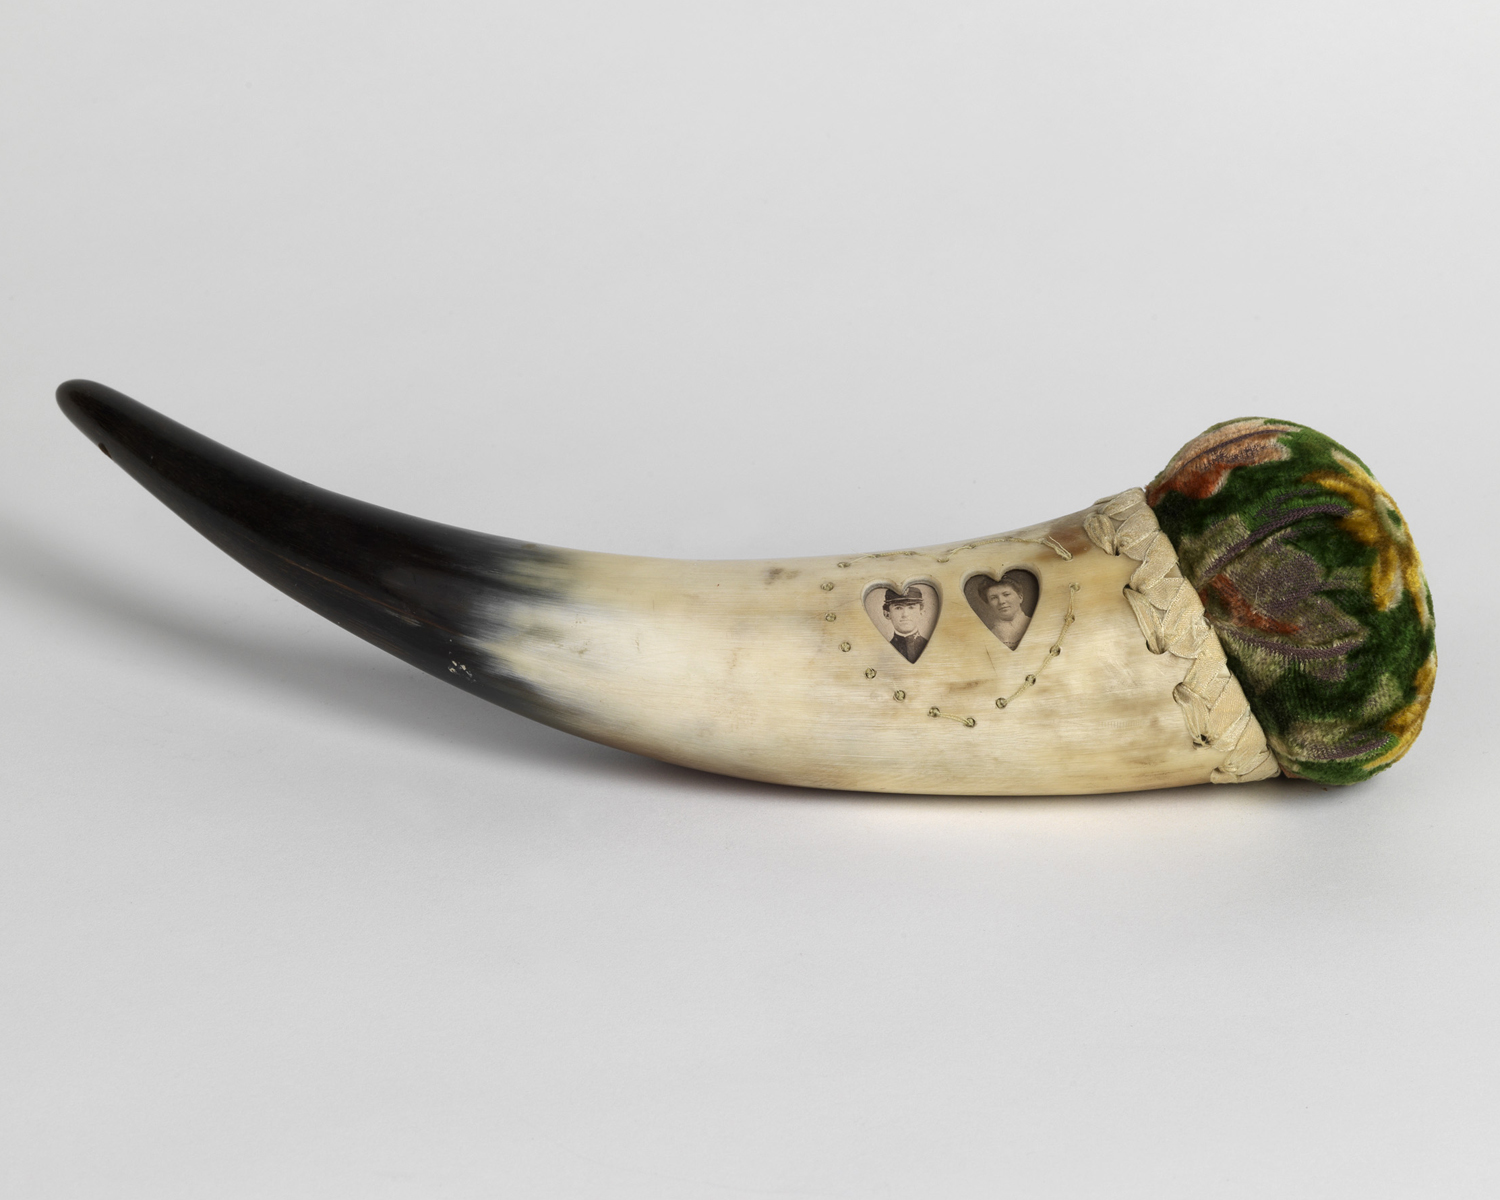    Horn with green velvet pin cushion inset with heart-shaped photographs of a man and wife.&nbsp; 1890s   